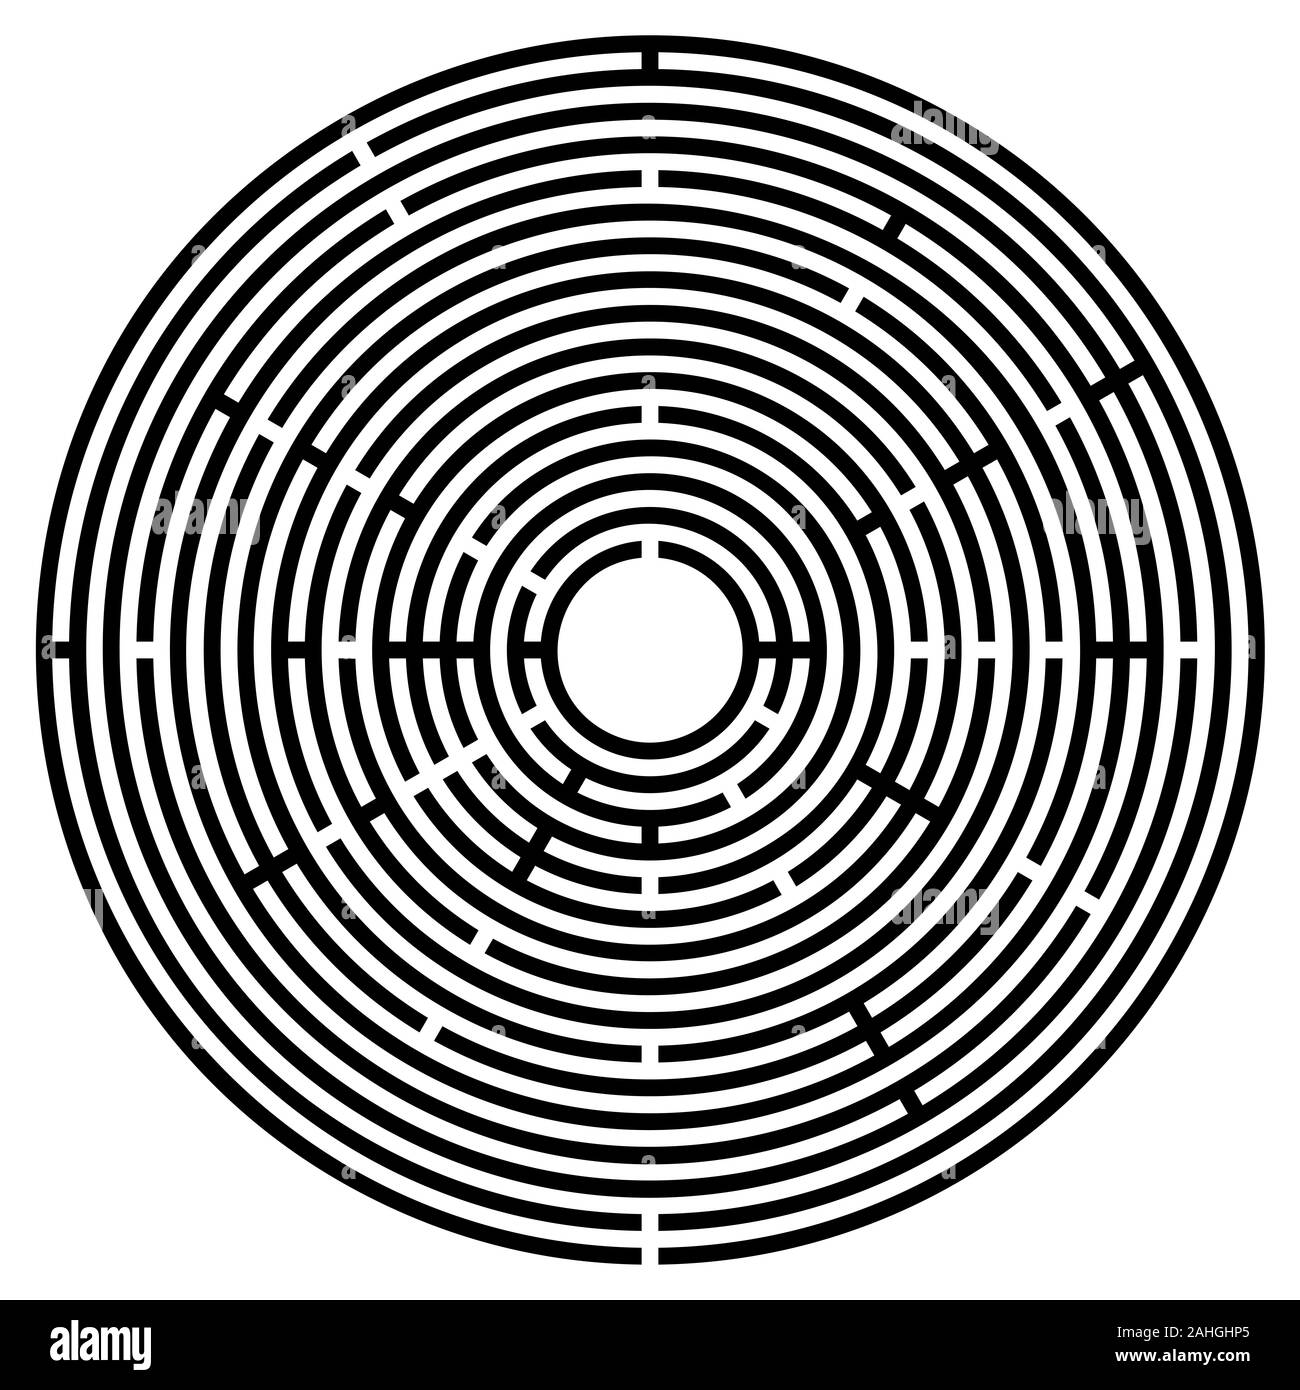 Big black circular maze. Radial labyrinth. Find a route to the centre. Print out and follow the path by a pencil or fingertip. Collection of paths. Stock Photo